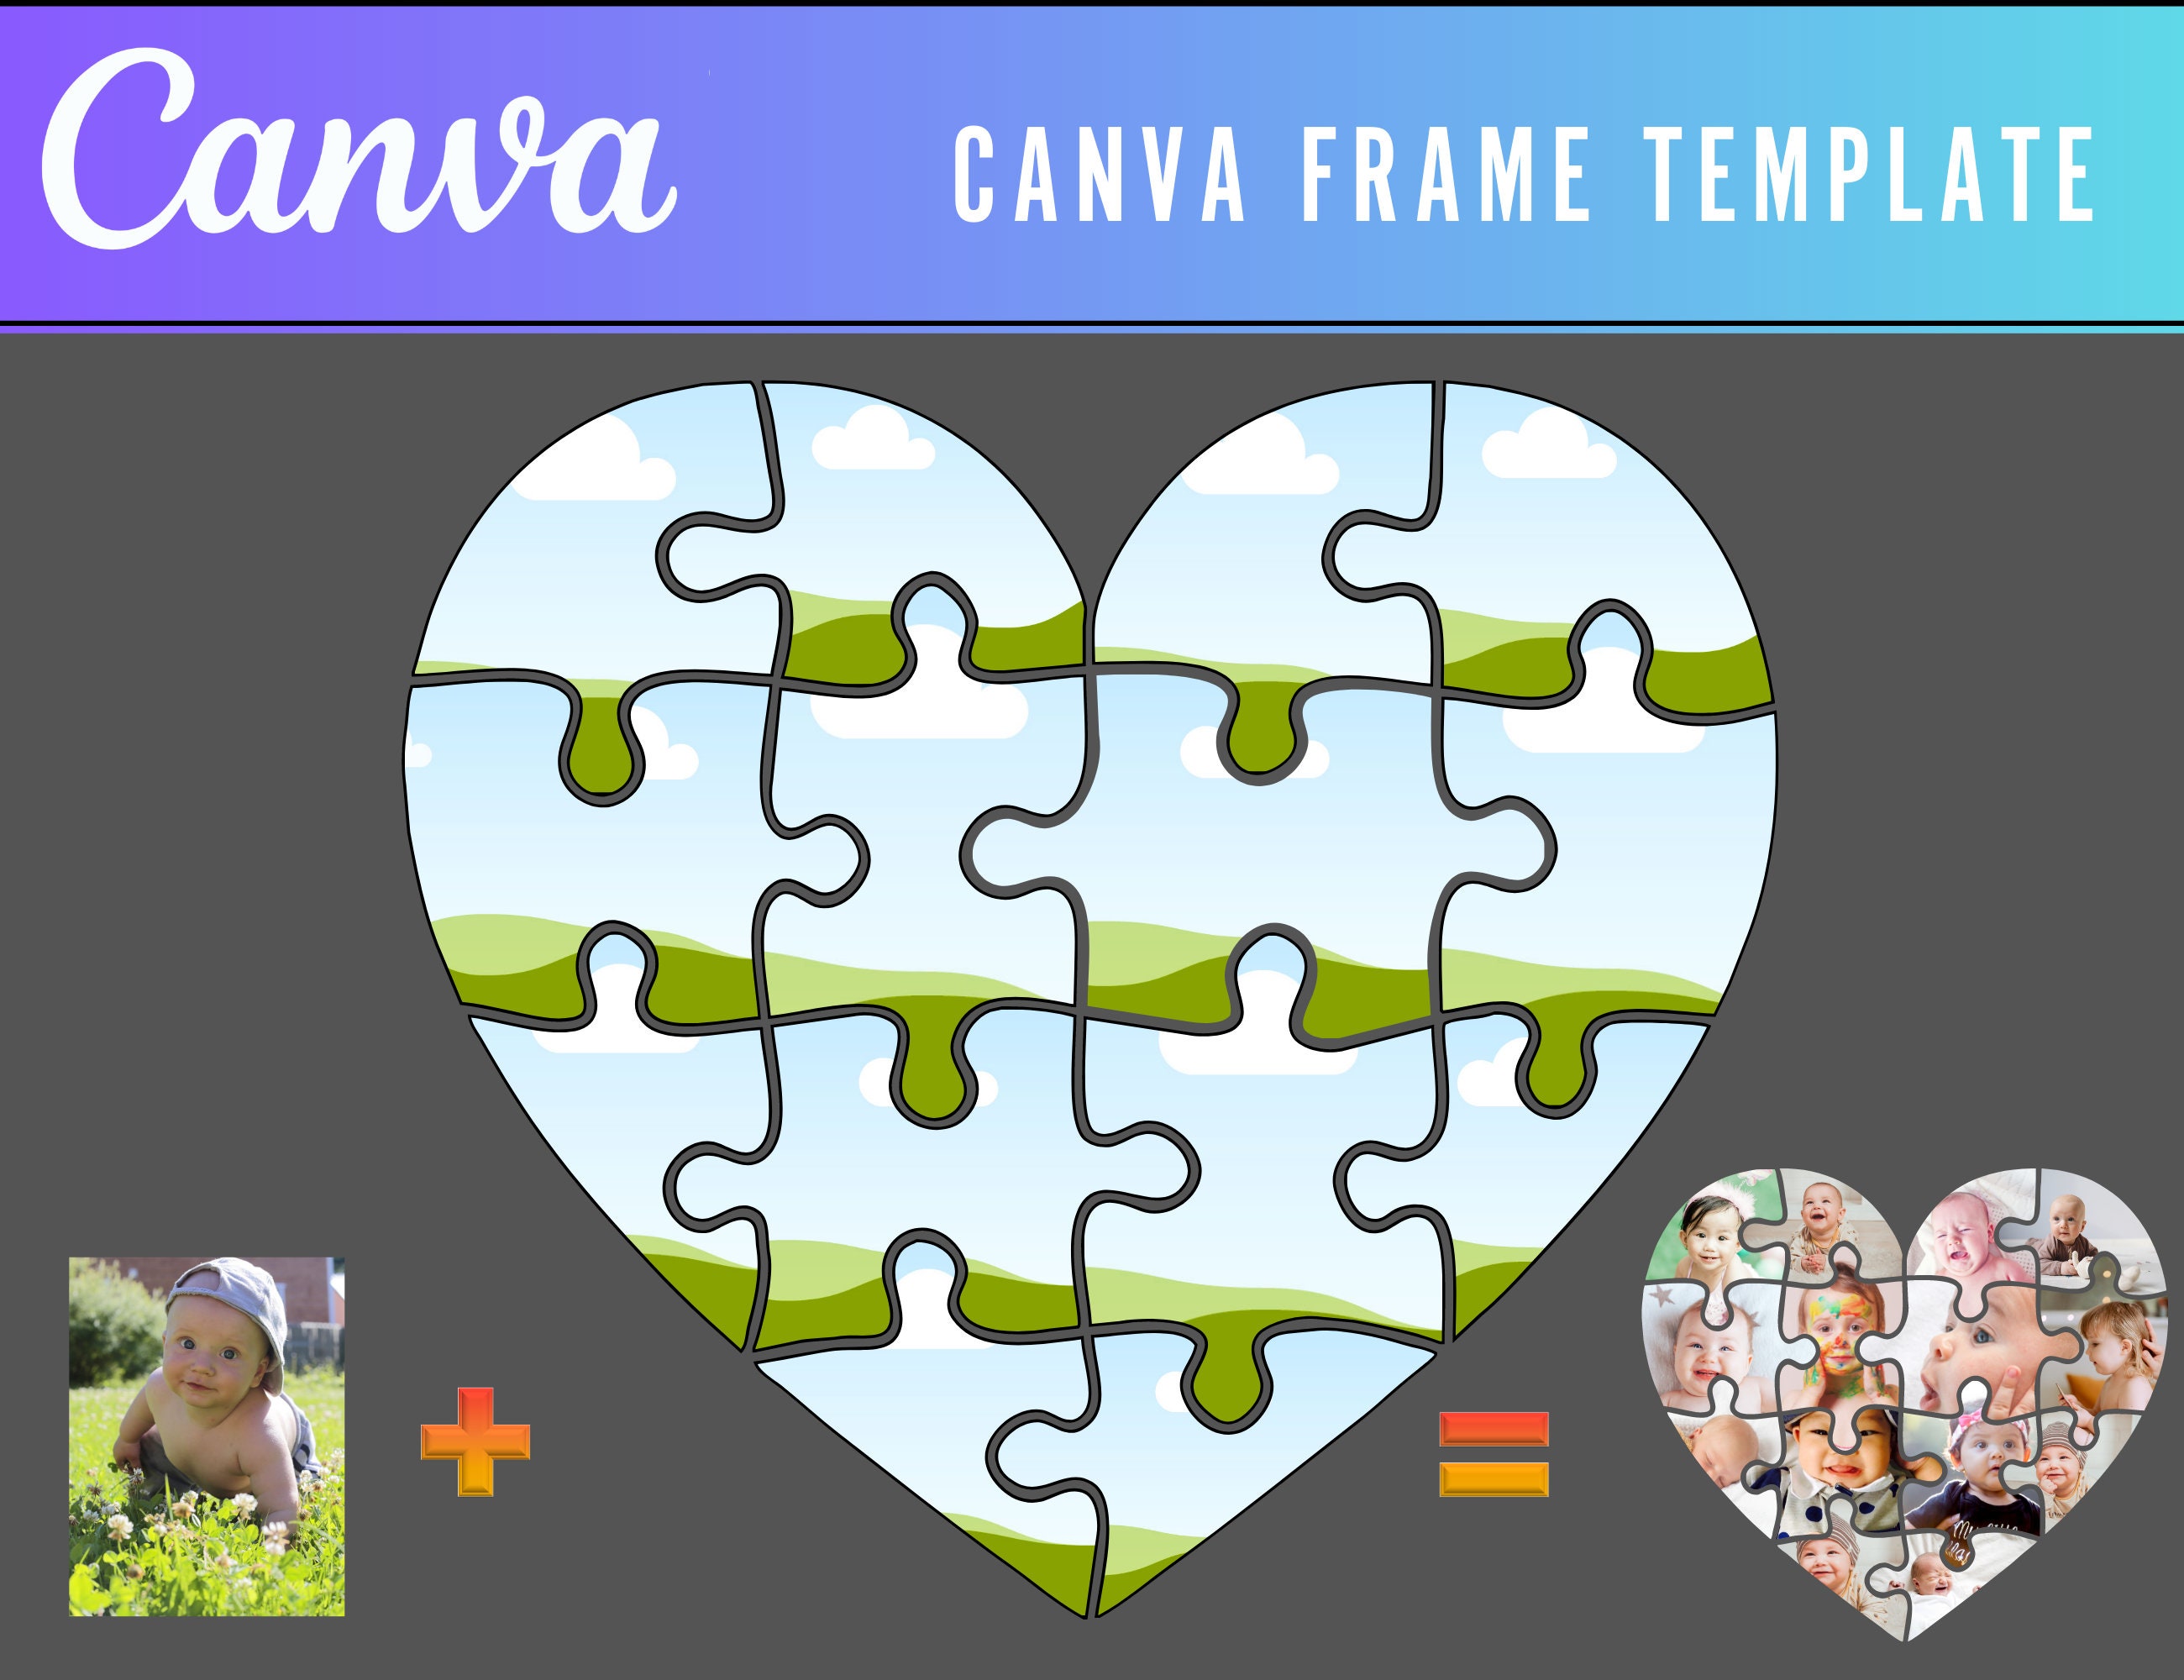 11.25x38.25 Puzzle Frame Kit with Glue Sheets